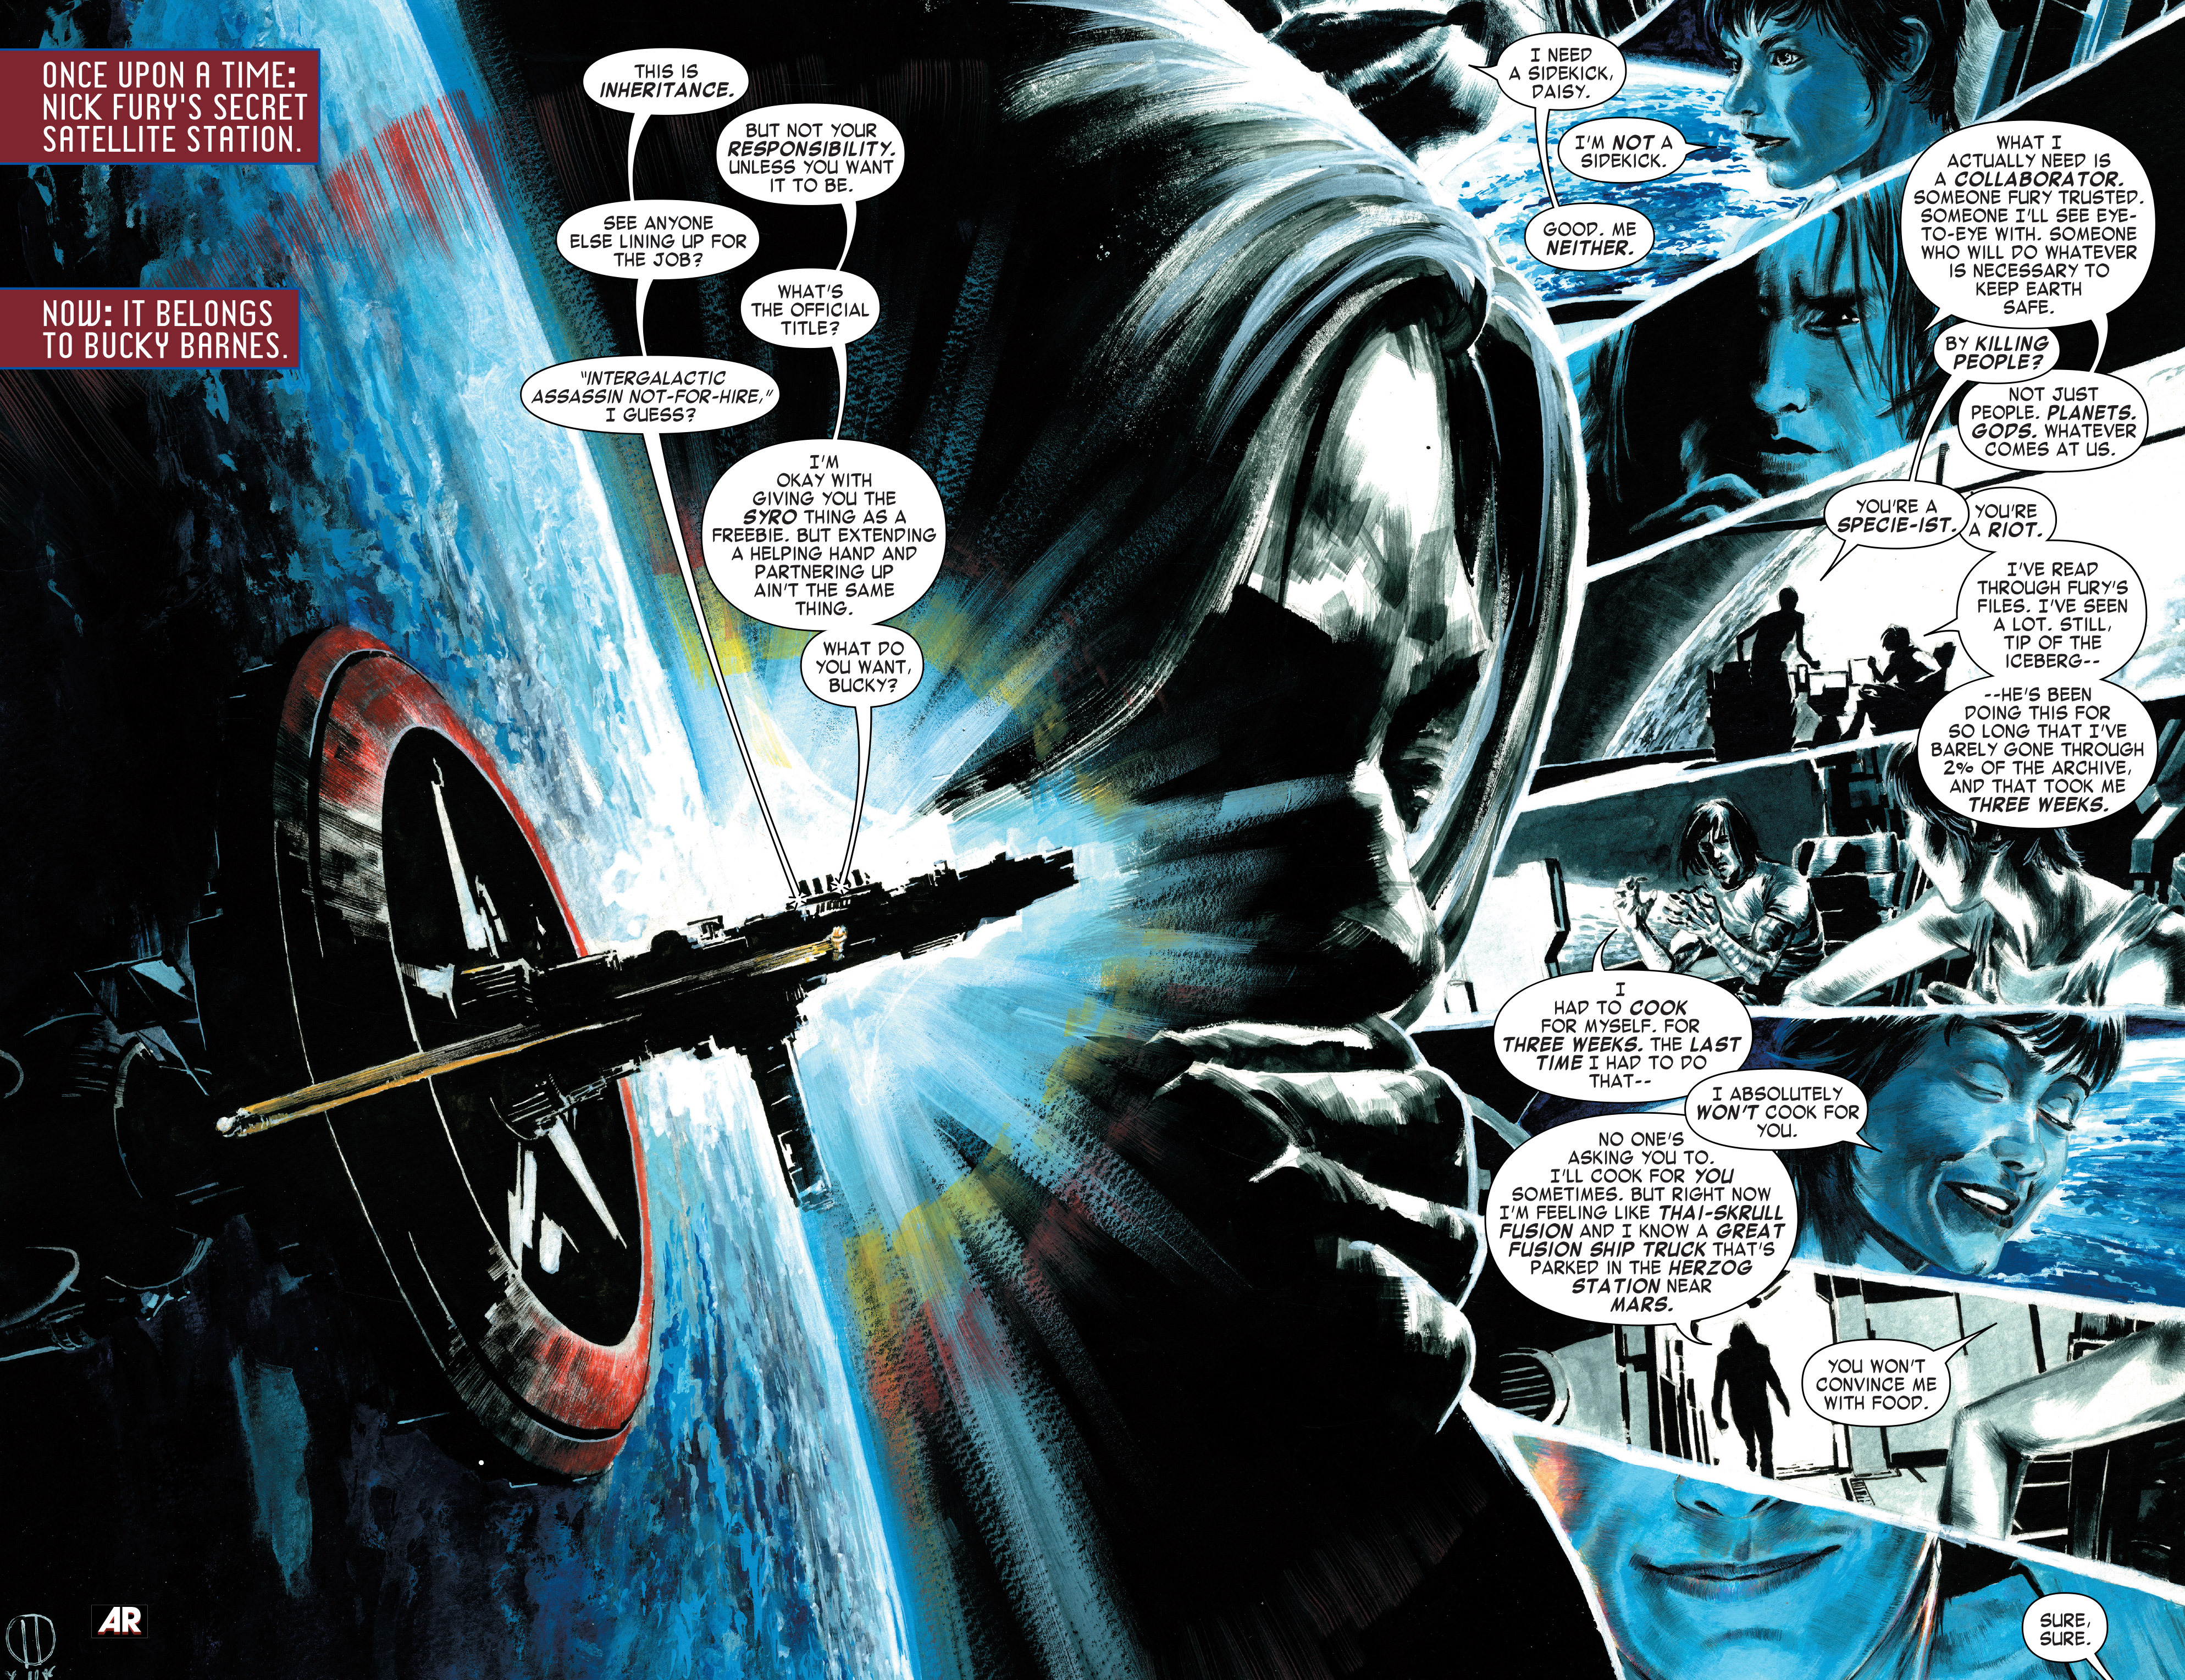 Read online Bucky Barnes: The Winter Soldier comic -  Issue #1 - 9